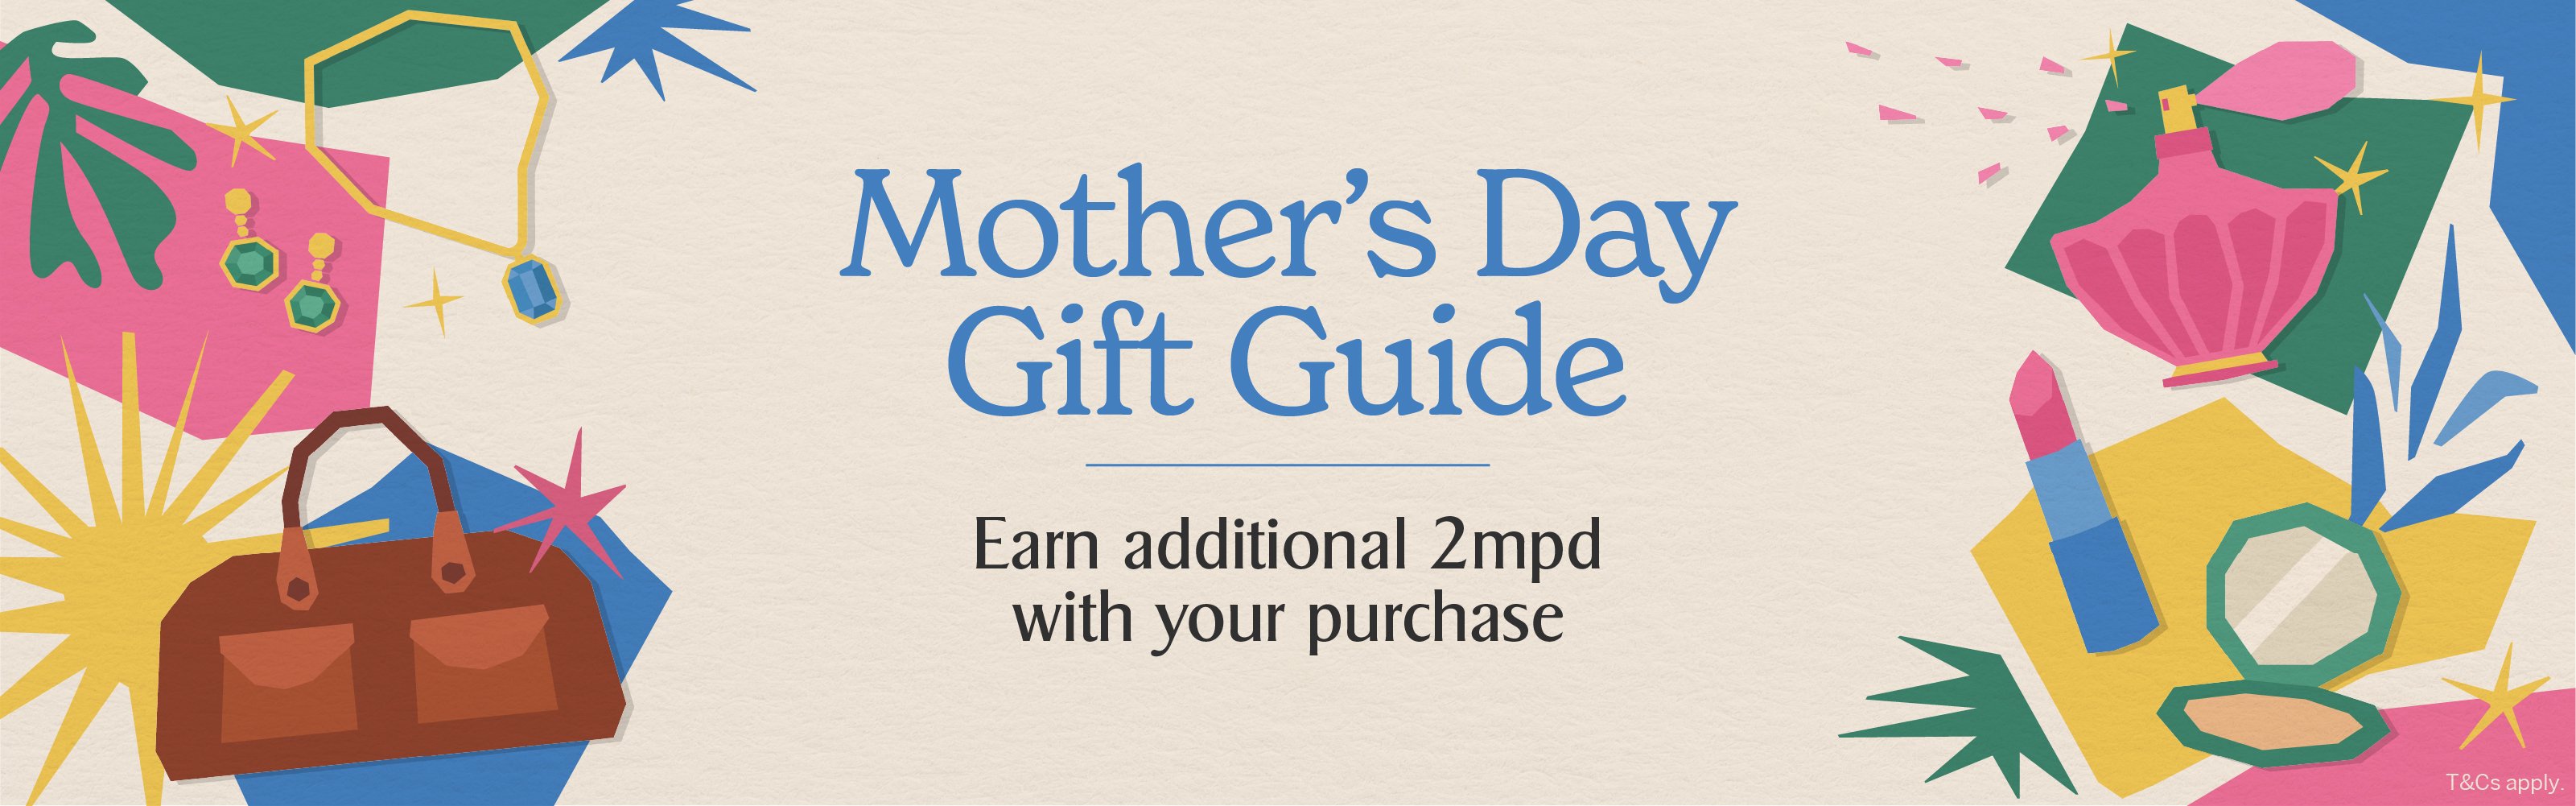 KrisShop's Mother's Day Gift Guide